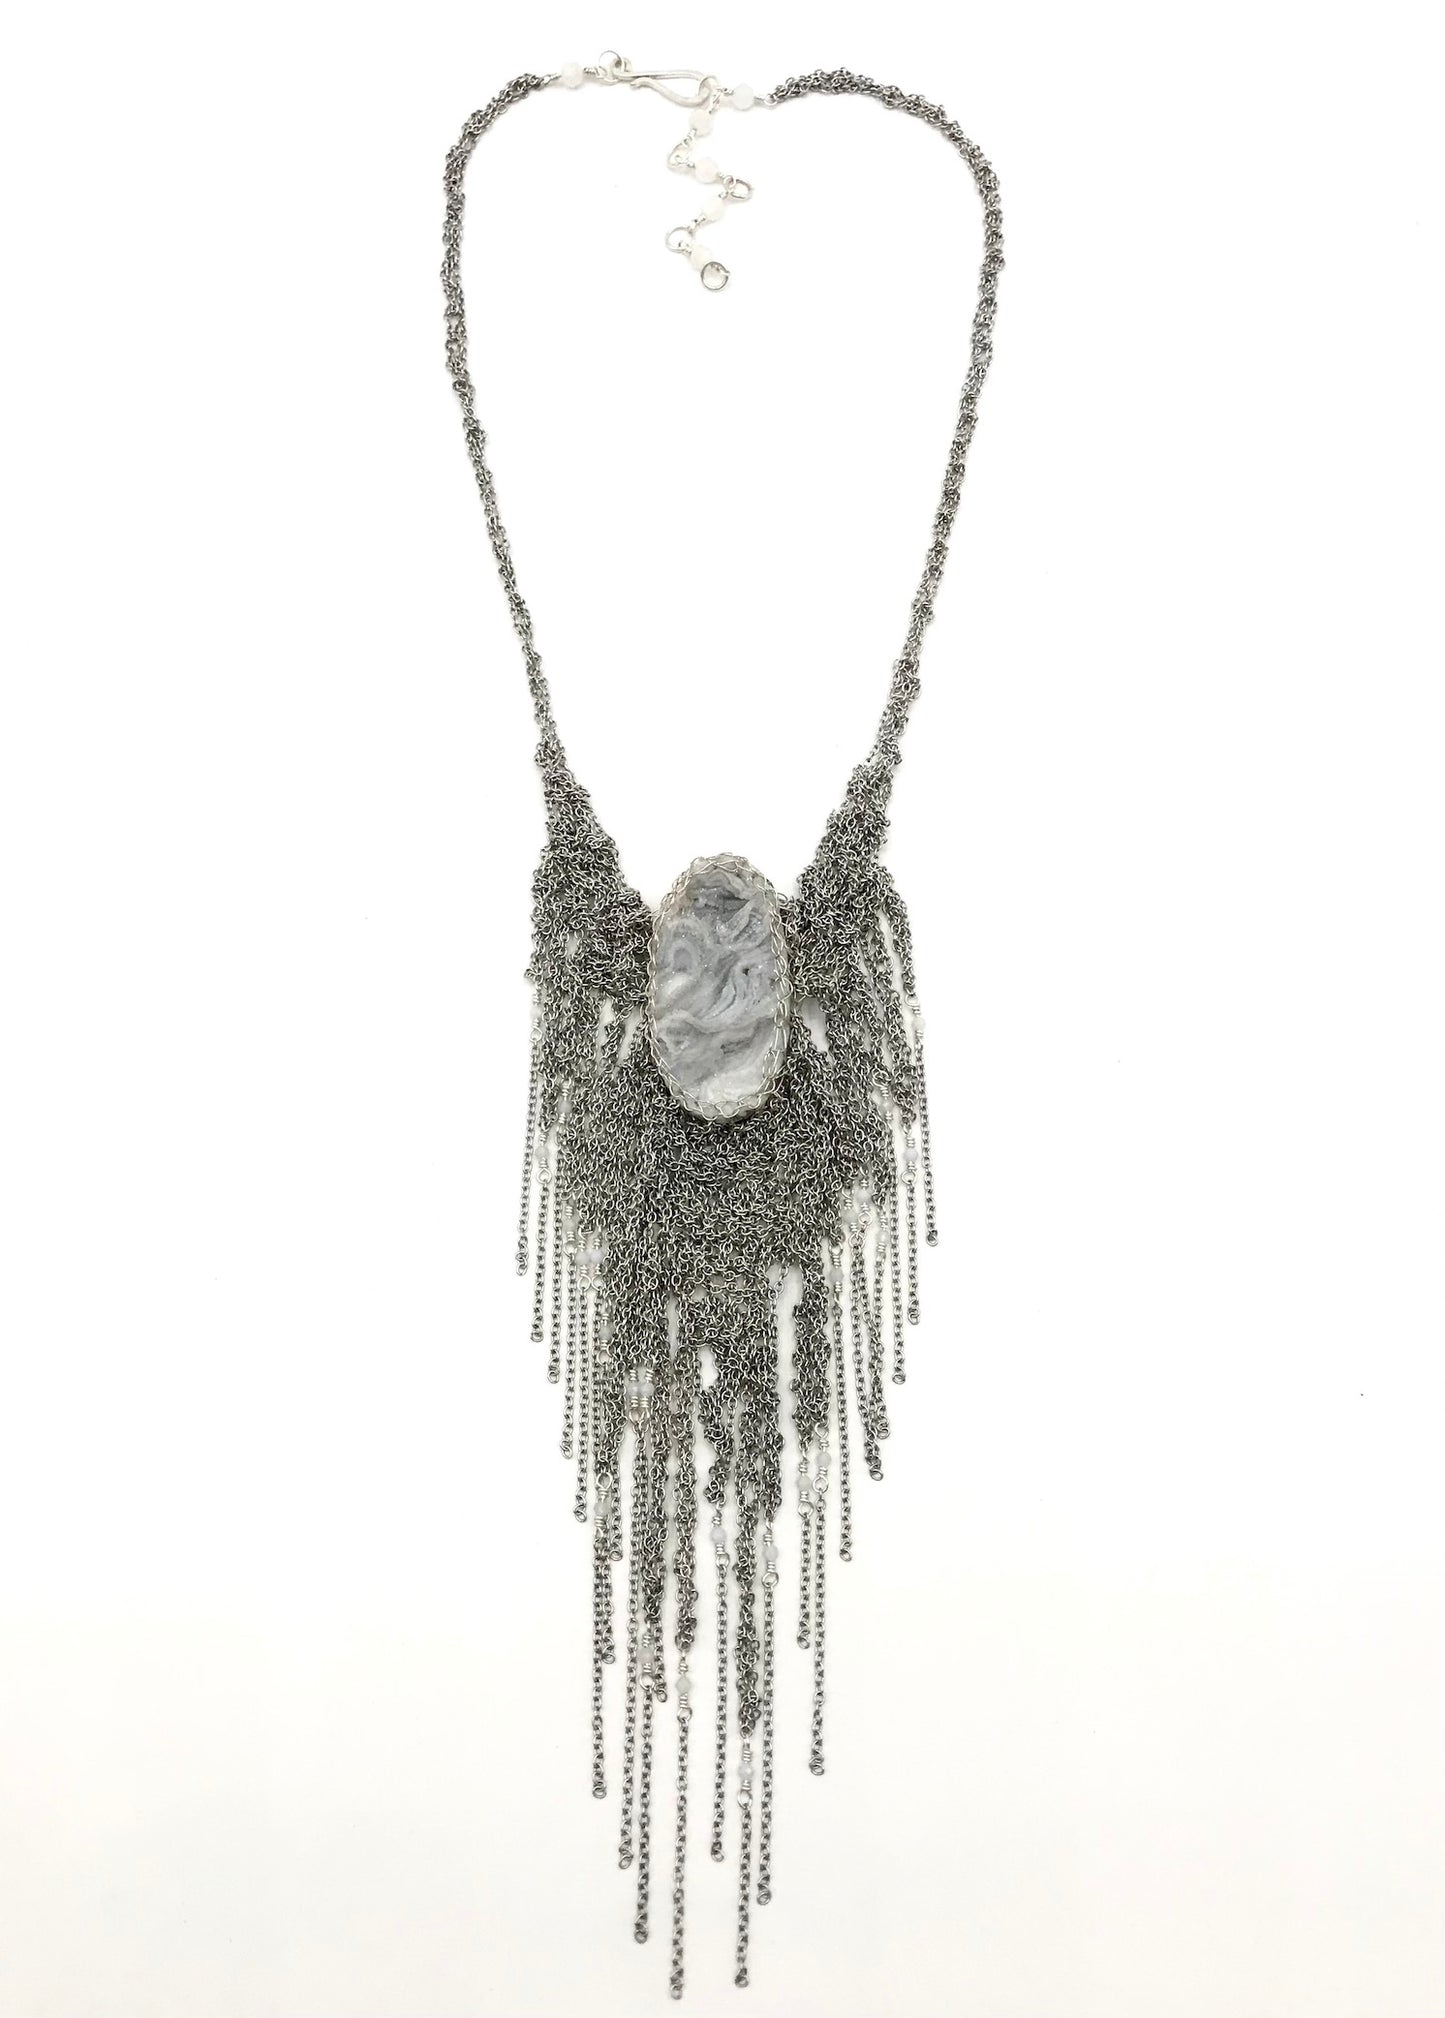 Necklace: OOAK: steel/silver: small: artist’s choice druzy crystal